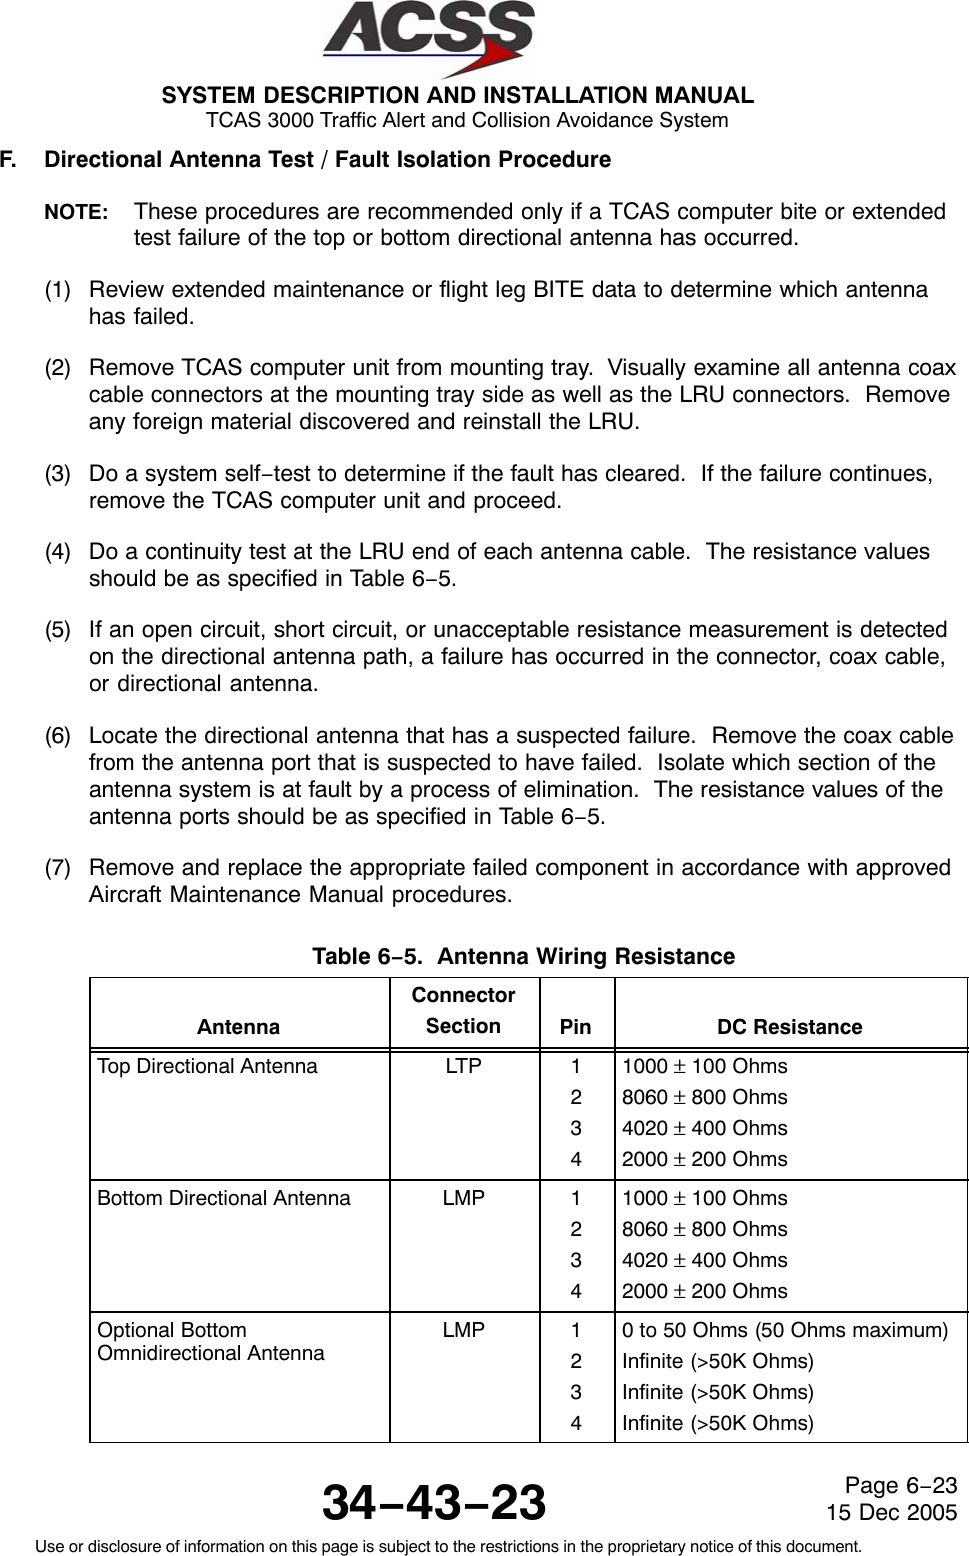 SYSTEM DESCRIPTION AND INSTALLATION MANUAL TCAS 3000 Traffic Alert and Collision Avoidance System34−43−23Use or disclosure of information on this page is subject to the restrictions in the proprietary notice of this document.Page 6−2315 Dec 2005F. Directional Antenna Test / Fault Isolation ProcedureNOTE: These procedures are recommended only if a TCAS computer bite or extendedtest failure of the top or bottom directional antenna has occurred.(1) Review extended maintenance or flight leg BITE data to determine which antennahas failed.(2) Remove TCAS computer unit from mounting tray.  Visually examine all antenna coaxcable connectors at the mounting tray side as well as the LRU connectors.  Removeany foreign material discovered and reinstall the LRU.(3) Do a system self−test to determine if the fault has cleared.  If the failure continues,remove the TCAS computer unit and proceed.(4) Do a continuity test at the LRU end of each antenna cable.  The resistance valuesshould be as specified in Table 6−5.(5) If an open circuit, short circuit, or unacceptable resistance measurement is detectedon the directional antenna path, a failure has occurred in the connector, coax cable,or directional antenna.(6) Locate the directional antenna that has a suspected failure.  Remove the coax cablefrom the antenna port that is suspected to have failed.  Isolate which section of theantenna system is at fault by a process of elimination.  The resistance values of theantenna ports should be as specified in Table 6−5.(7) Remove and replace the appropriate failed component in accordance with approvedAircraft Maintenance Manual procedures.Table 6−5.  Antenna Wiring Resistance AntennaConnectorSection Pin DC ResistanceTop Directional Antenna LTP 12341000 ± 100 Ohms8060 ± 800 Ohms4020 ± 400 Ohms2000 ± 200 OhmsBottom Directional Antenna LMP 12341000 ± 100 Ohms8060 ± 800 Ohms4020 ± 400 Ohms2000 ± 200 OhmsOptional BottomOmnidirectional AntennaLMP 12340 to 50 Ohms (50 Ohms maximum)Infinite (&gt;50K Ohms)Infinite (&gt;50K Ohms)Infinite (&gt;50K Ohms)